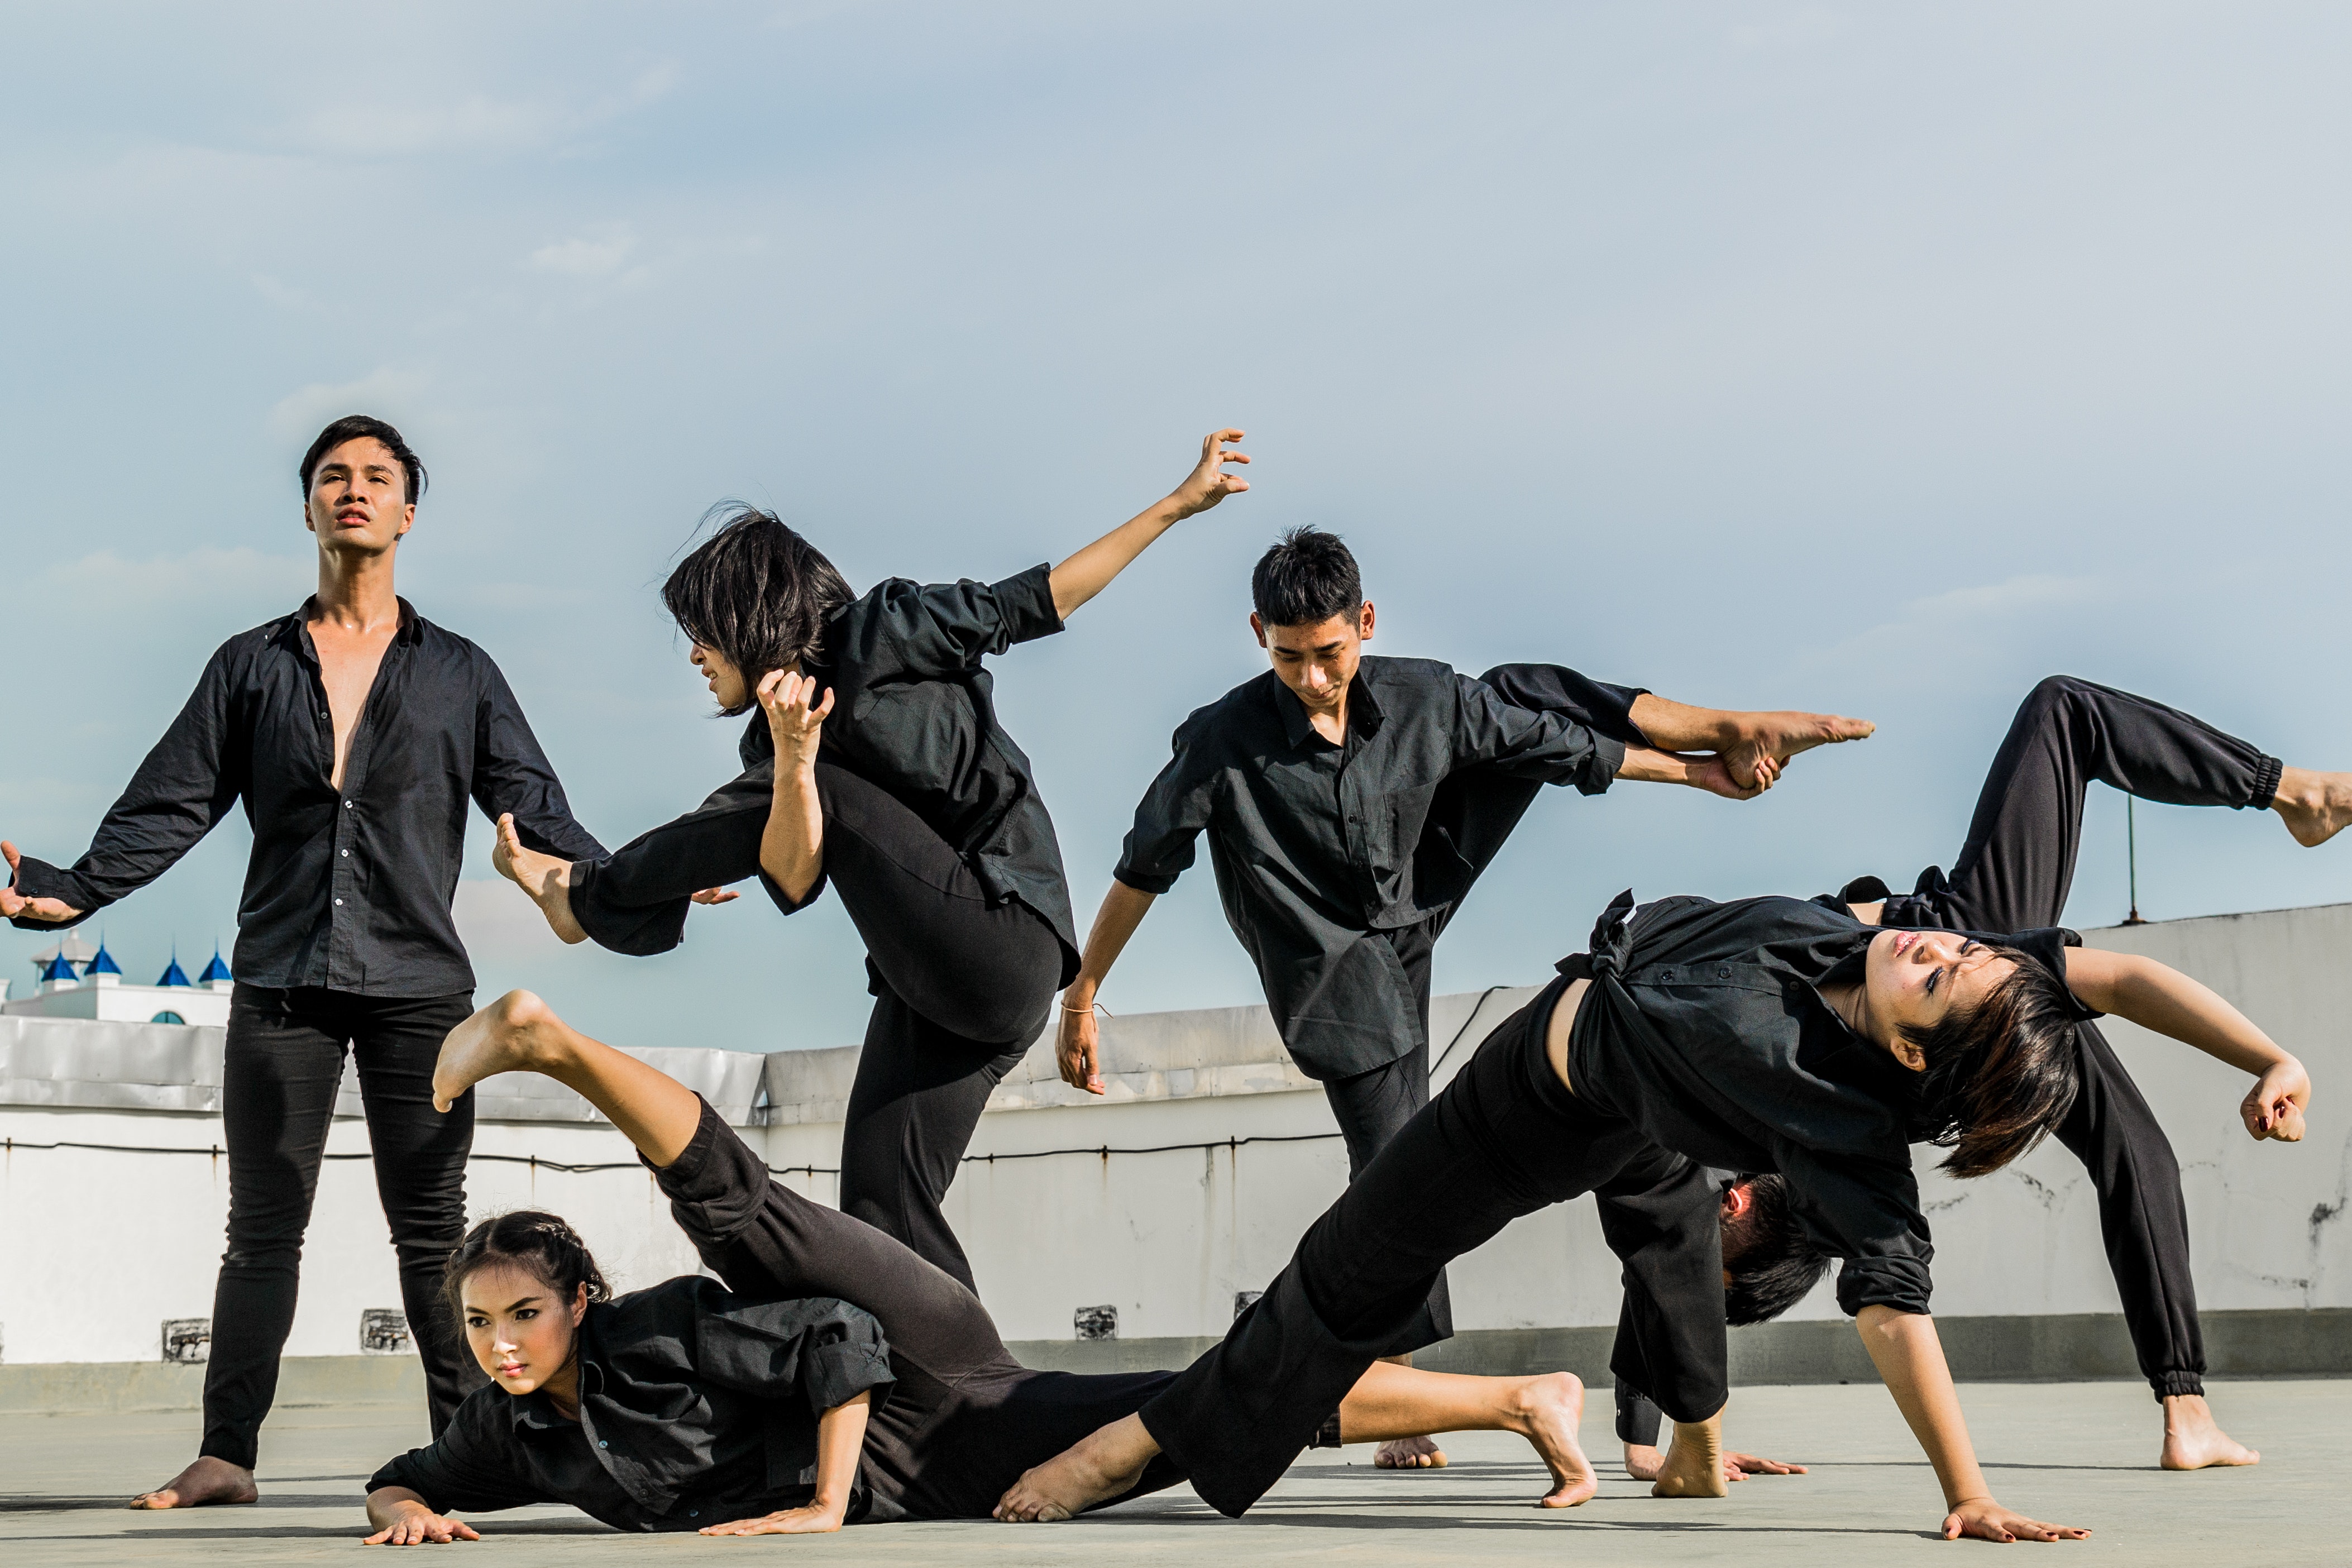 Persons in Black Shirt and Pants, Action, Outdoors, Outfit, Performance, HQ Photo